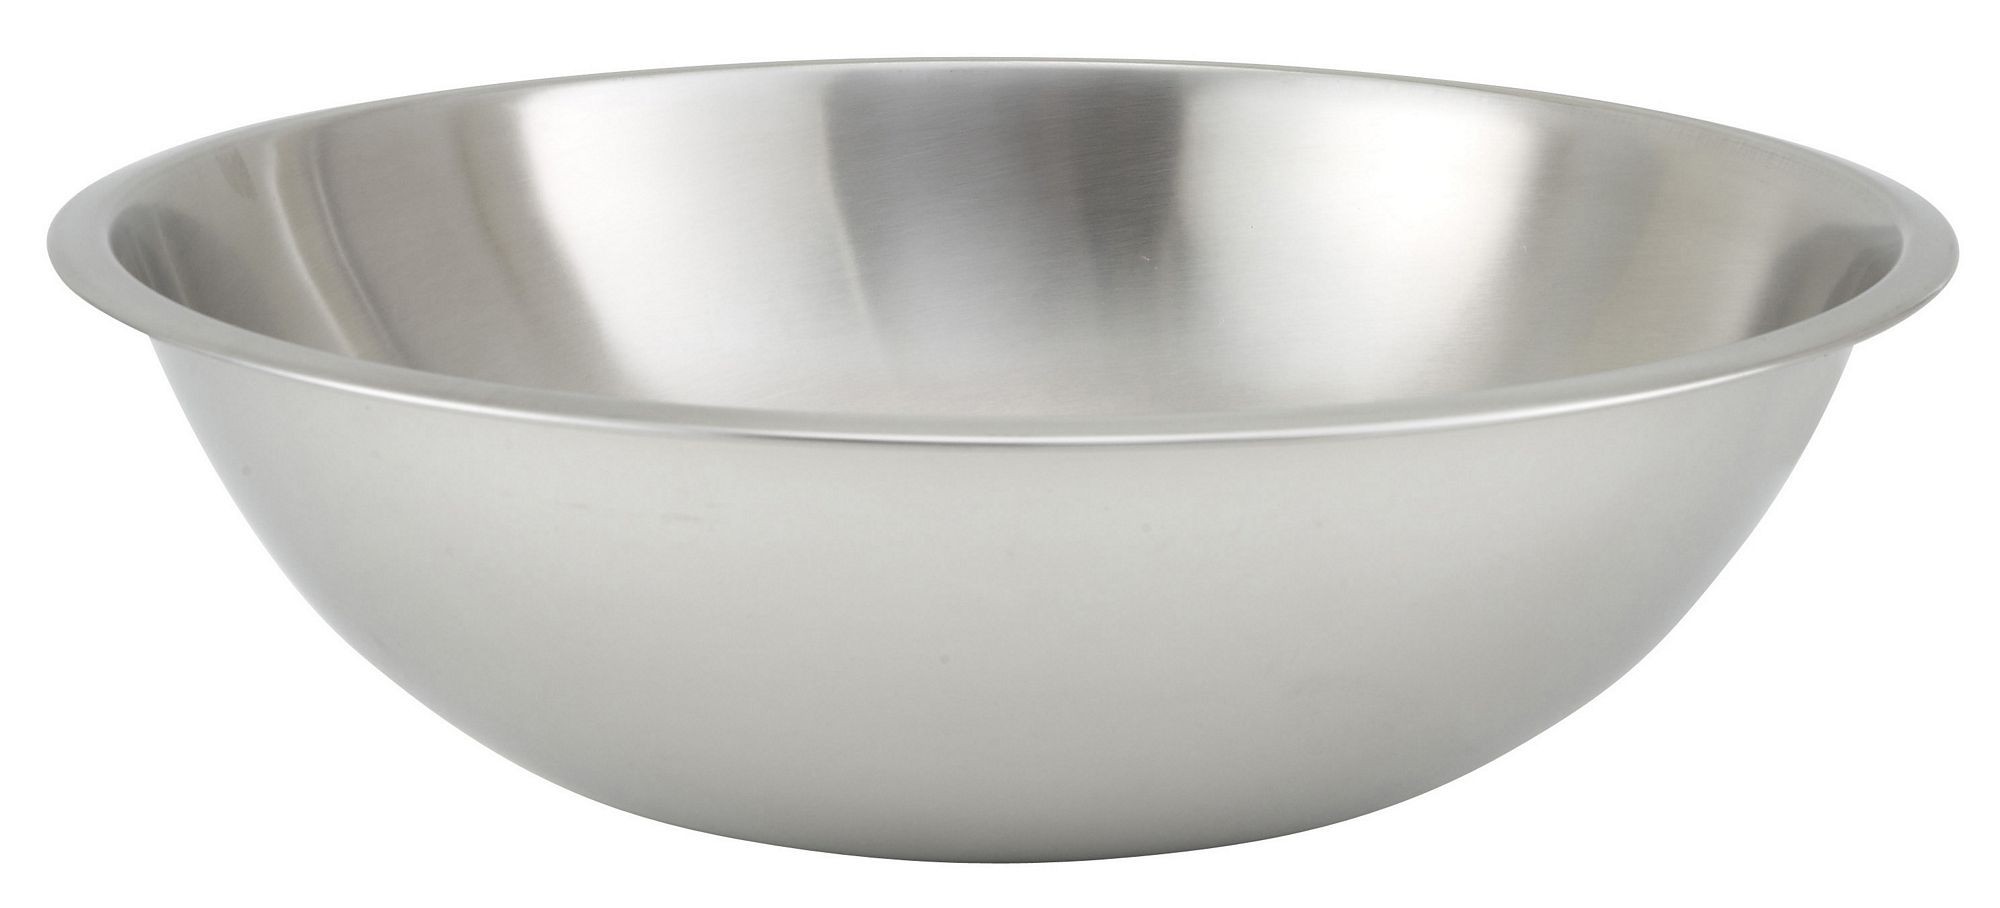 Winco MXHV-1600 Heavy Duty Stainless Steel 16 Qt. Mixing Bowl - LionsDeal